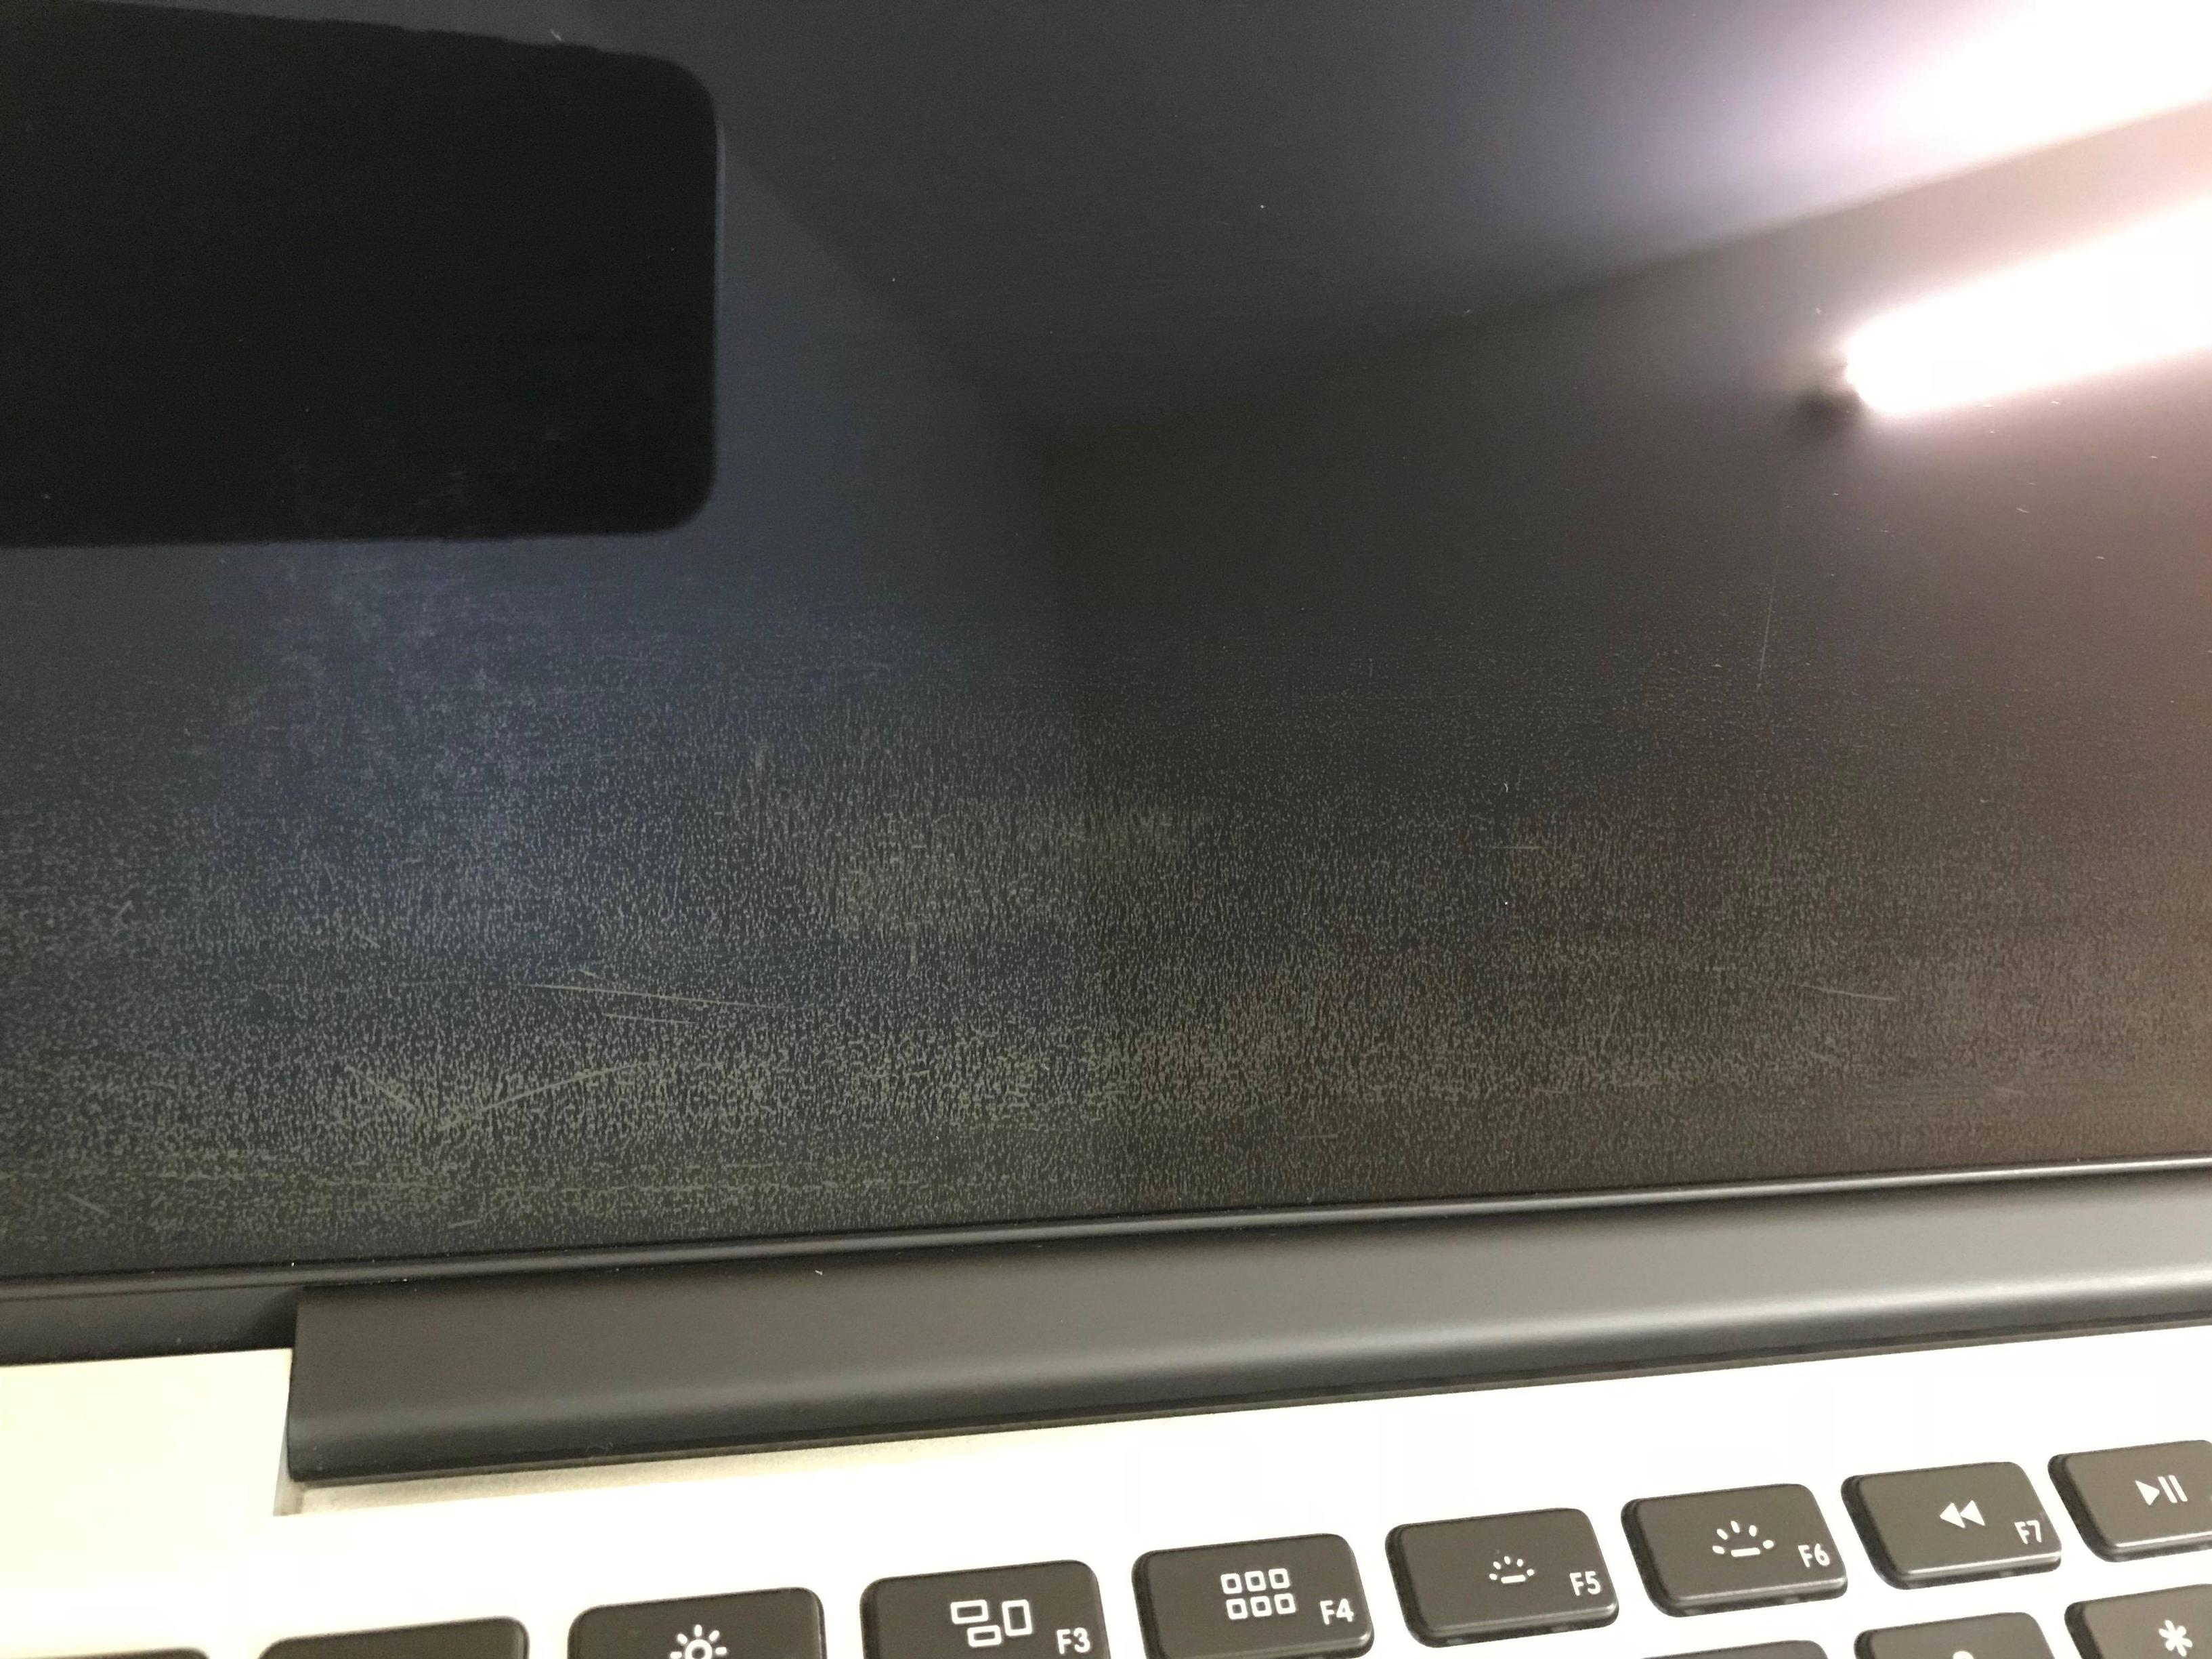 Can i use screen cleaner on retina macbook pro